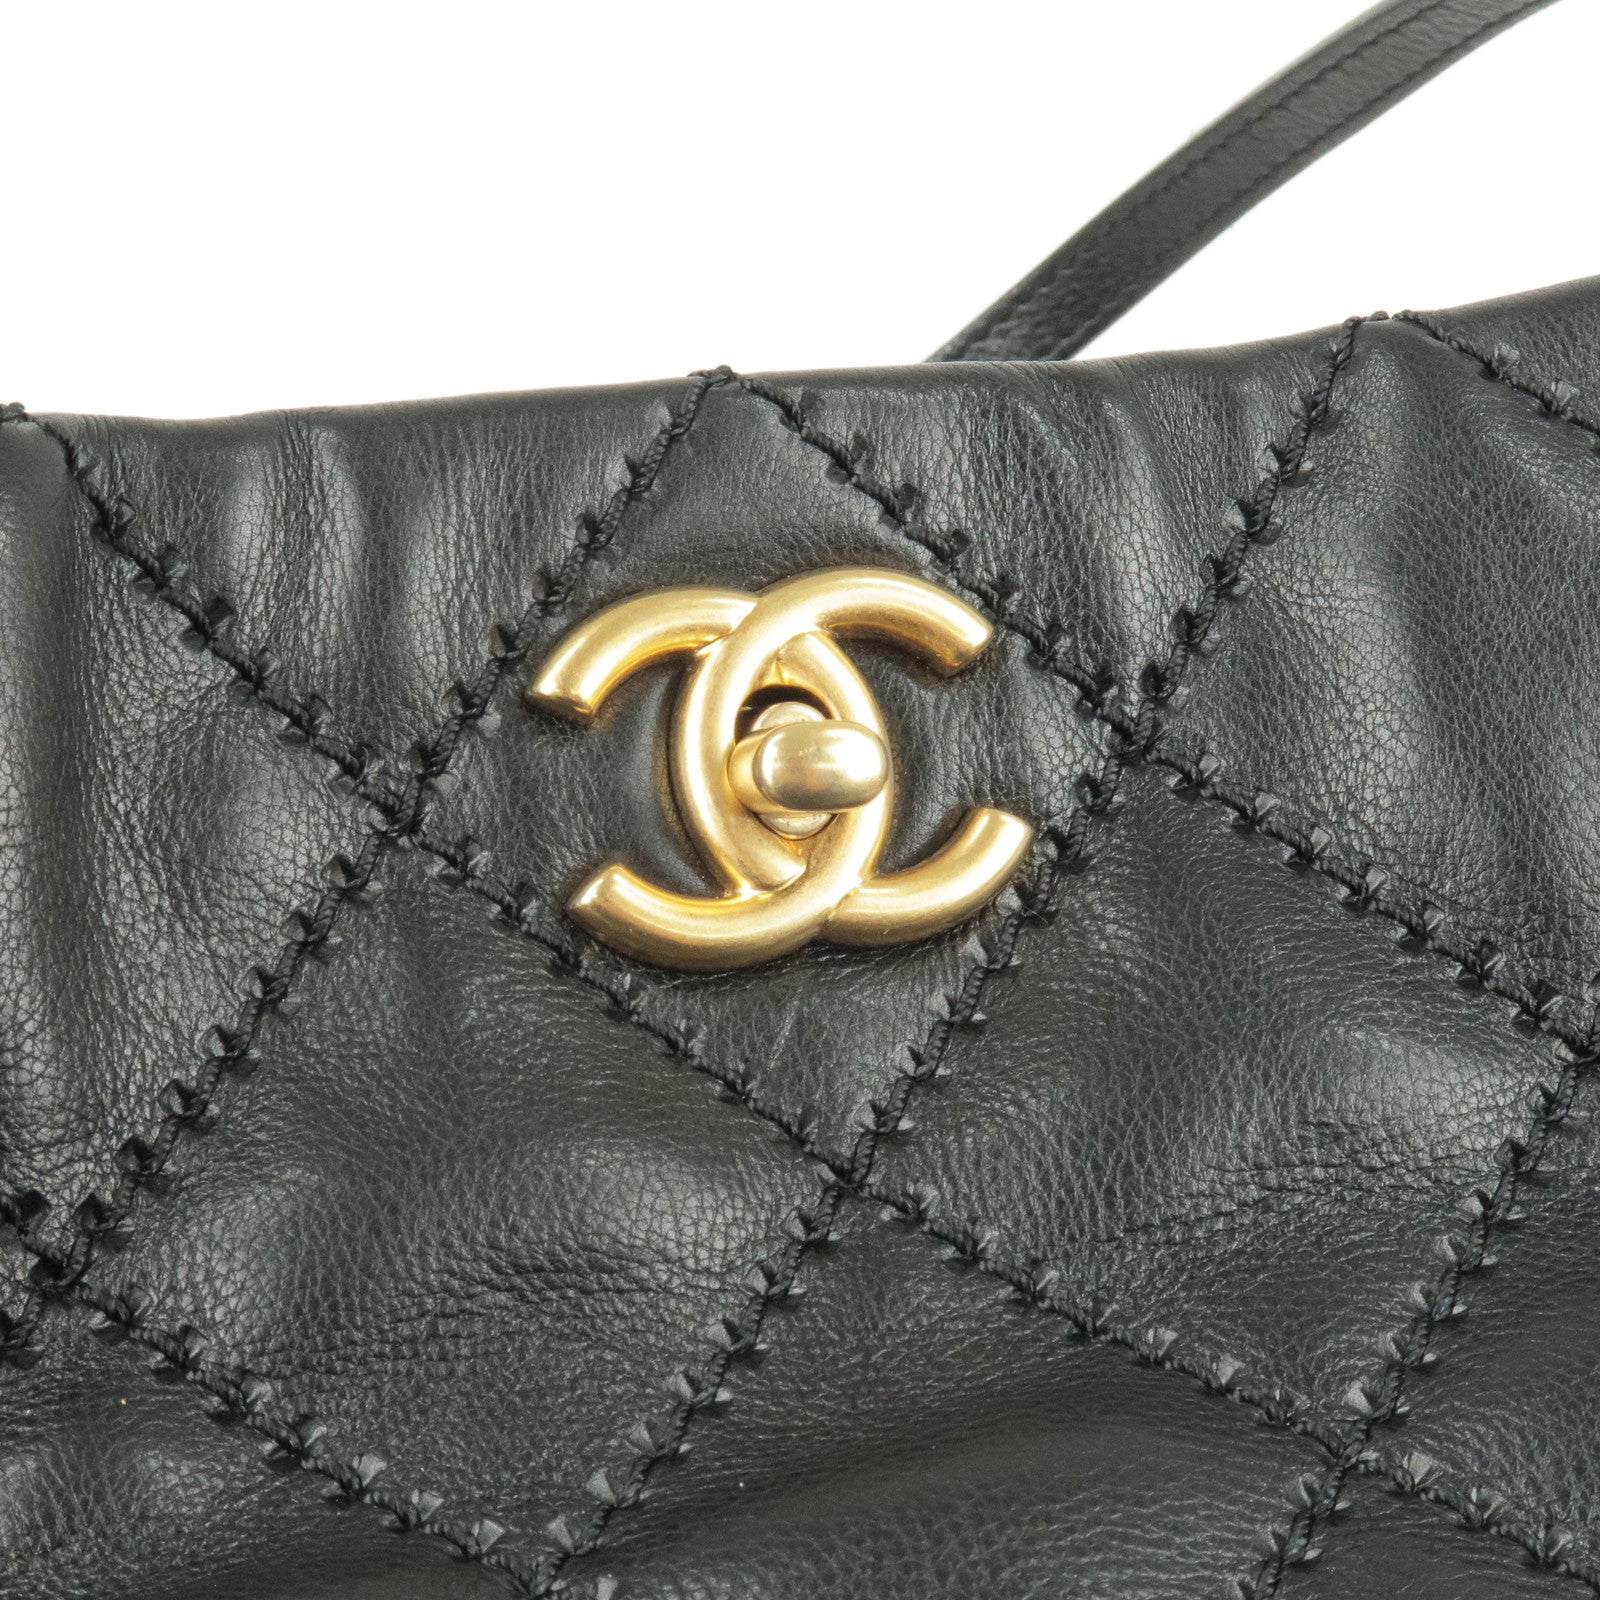 Leather - Stitch - chanel gabrielle wallet on chain shoulder bag in beige  and black quilted leather - Bag - Black – Chanel Pre - Ultra - Shoulder -  Quilted - CHANEL - Owned 1997 small diamond quilted briefcase - Chain